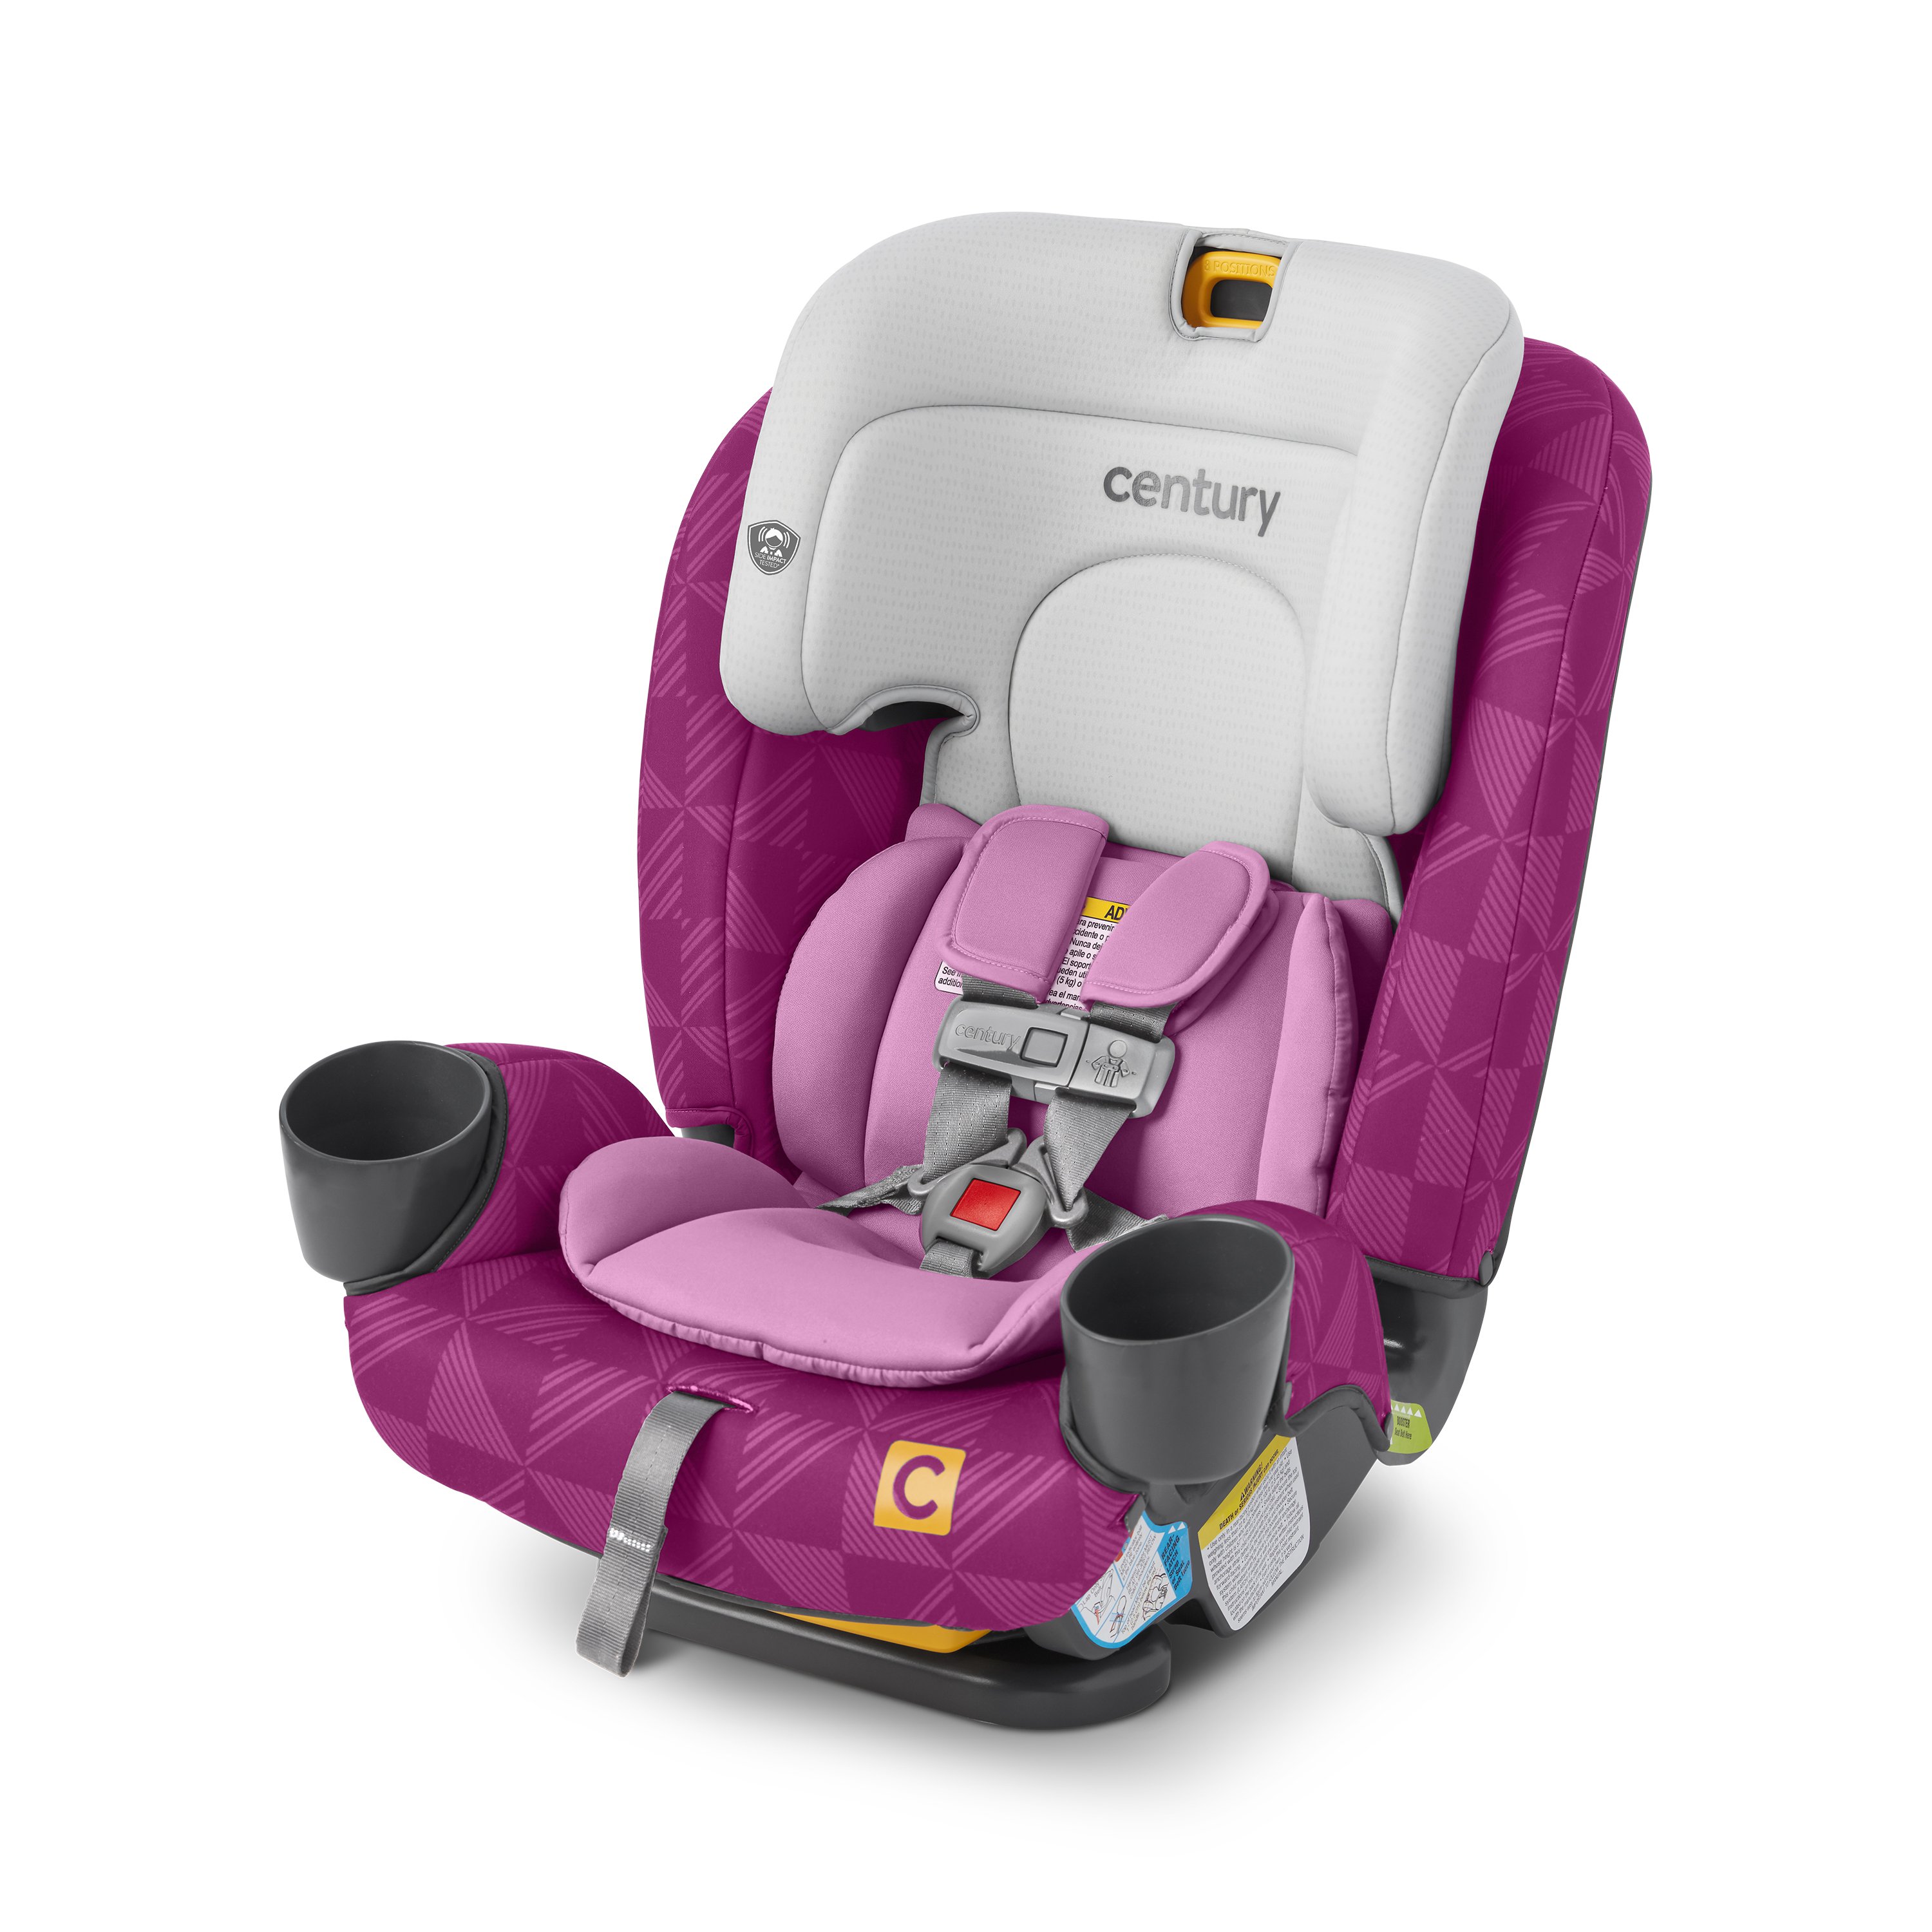 New / Open Box - Graco Slim fit 3 In 1 Convertible Car Seat for